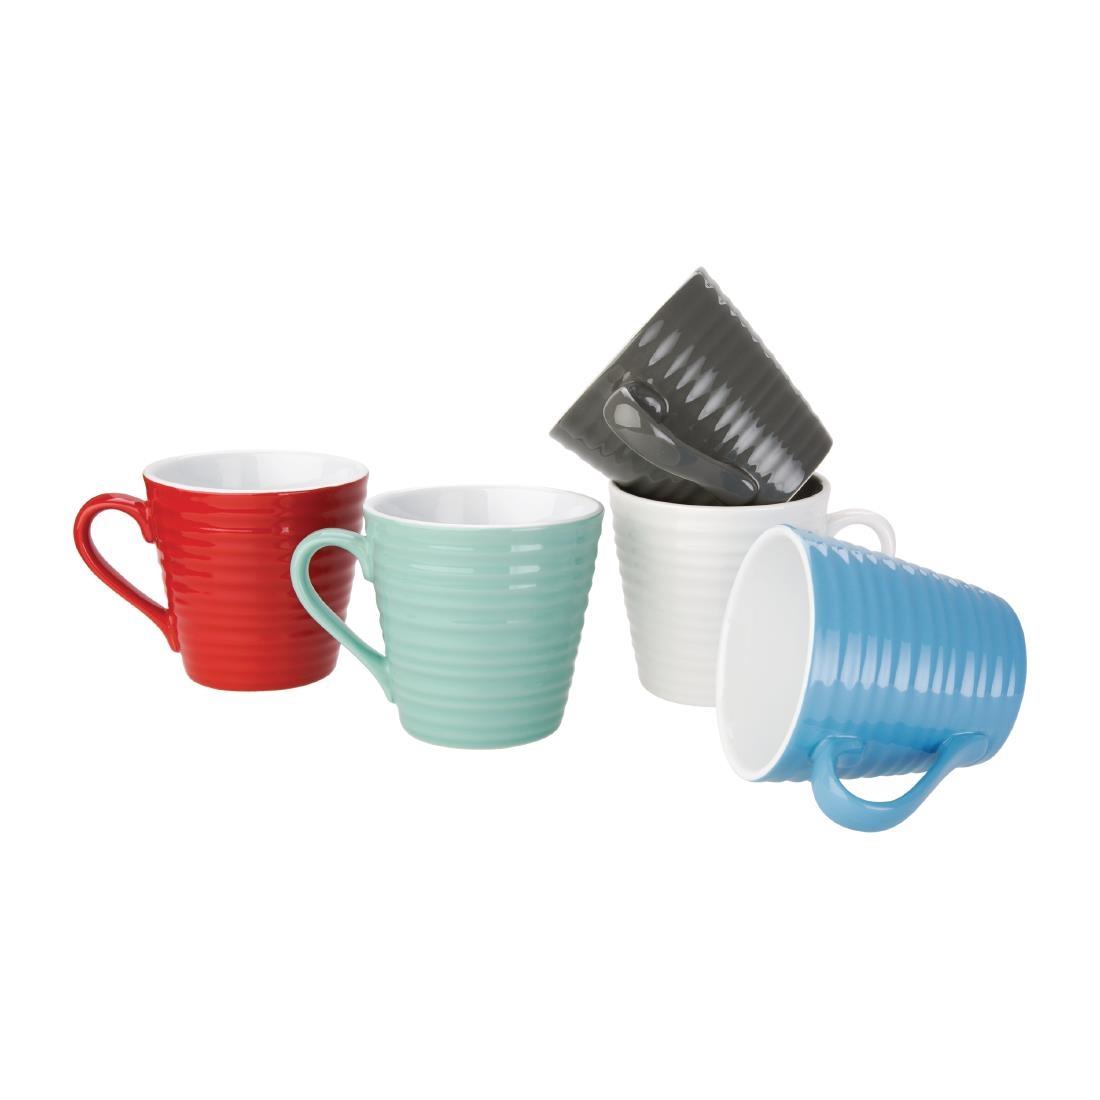 Olympia Café Aroma Mugs Charcoal 340ml (Pack of 6) - DH634  - 2